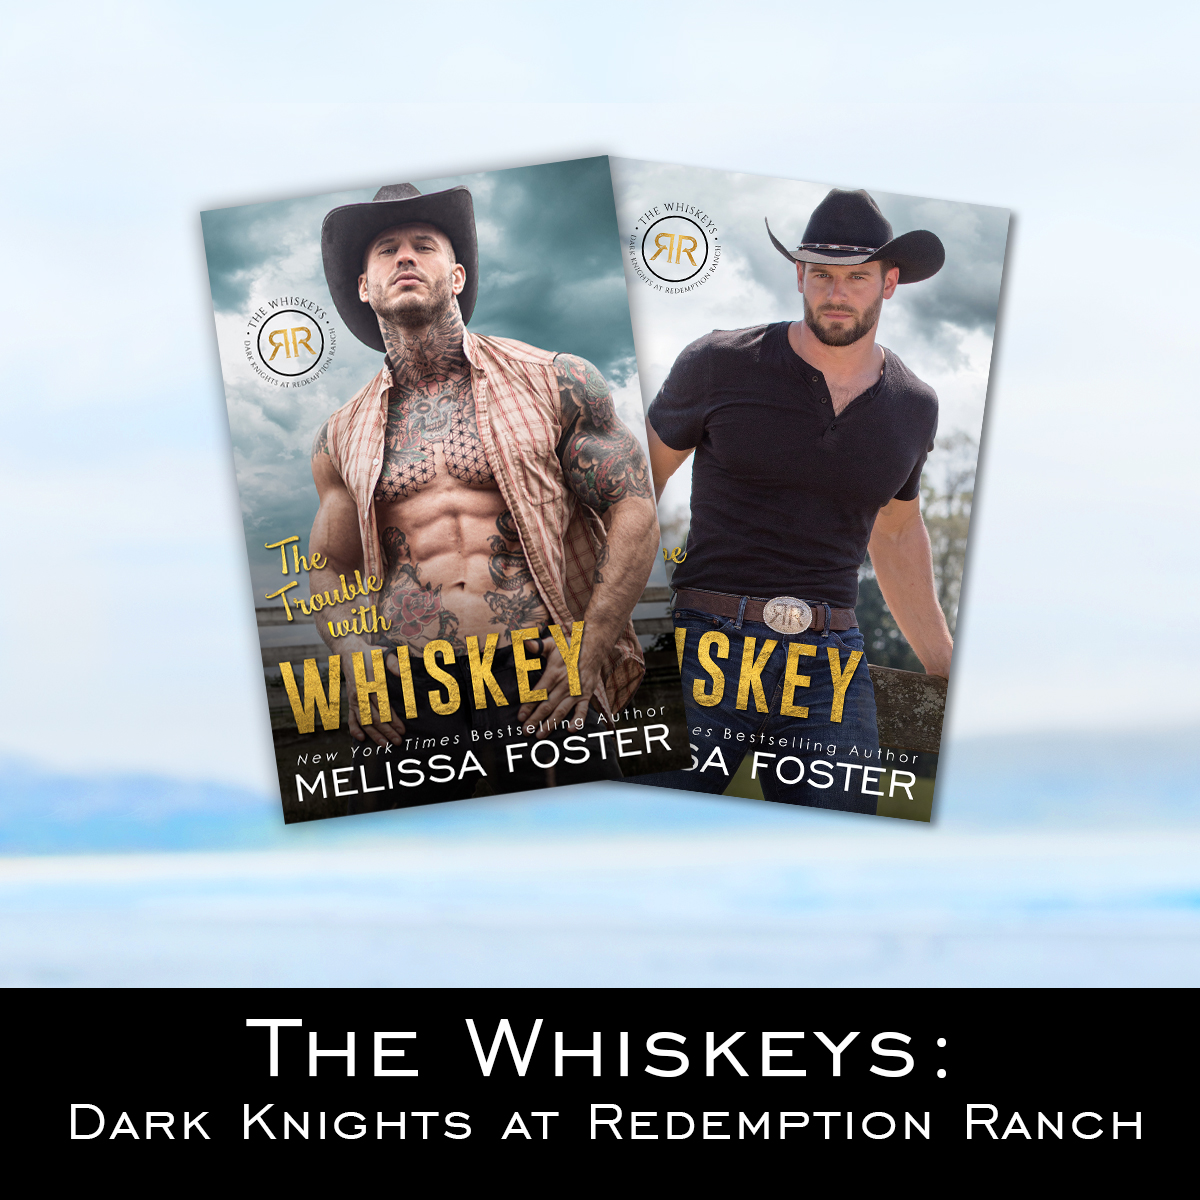 The Whiskeys: Dark Knights at Redemption Ranch by Melissa Foster